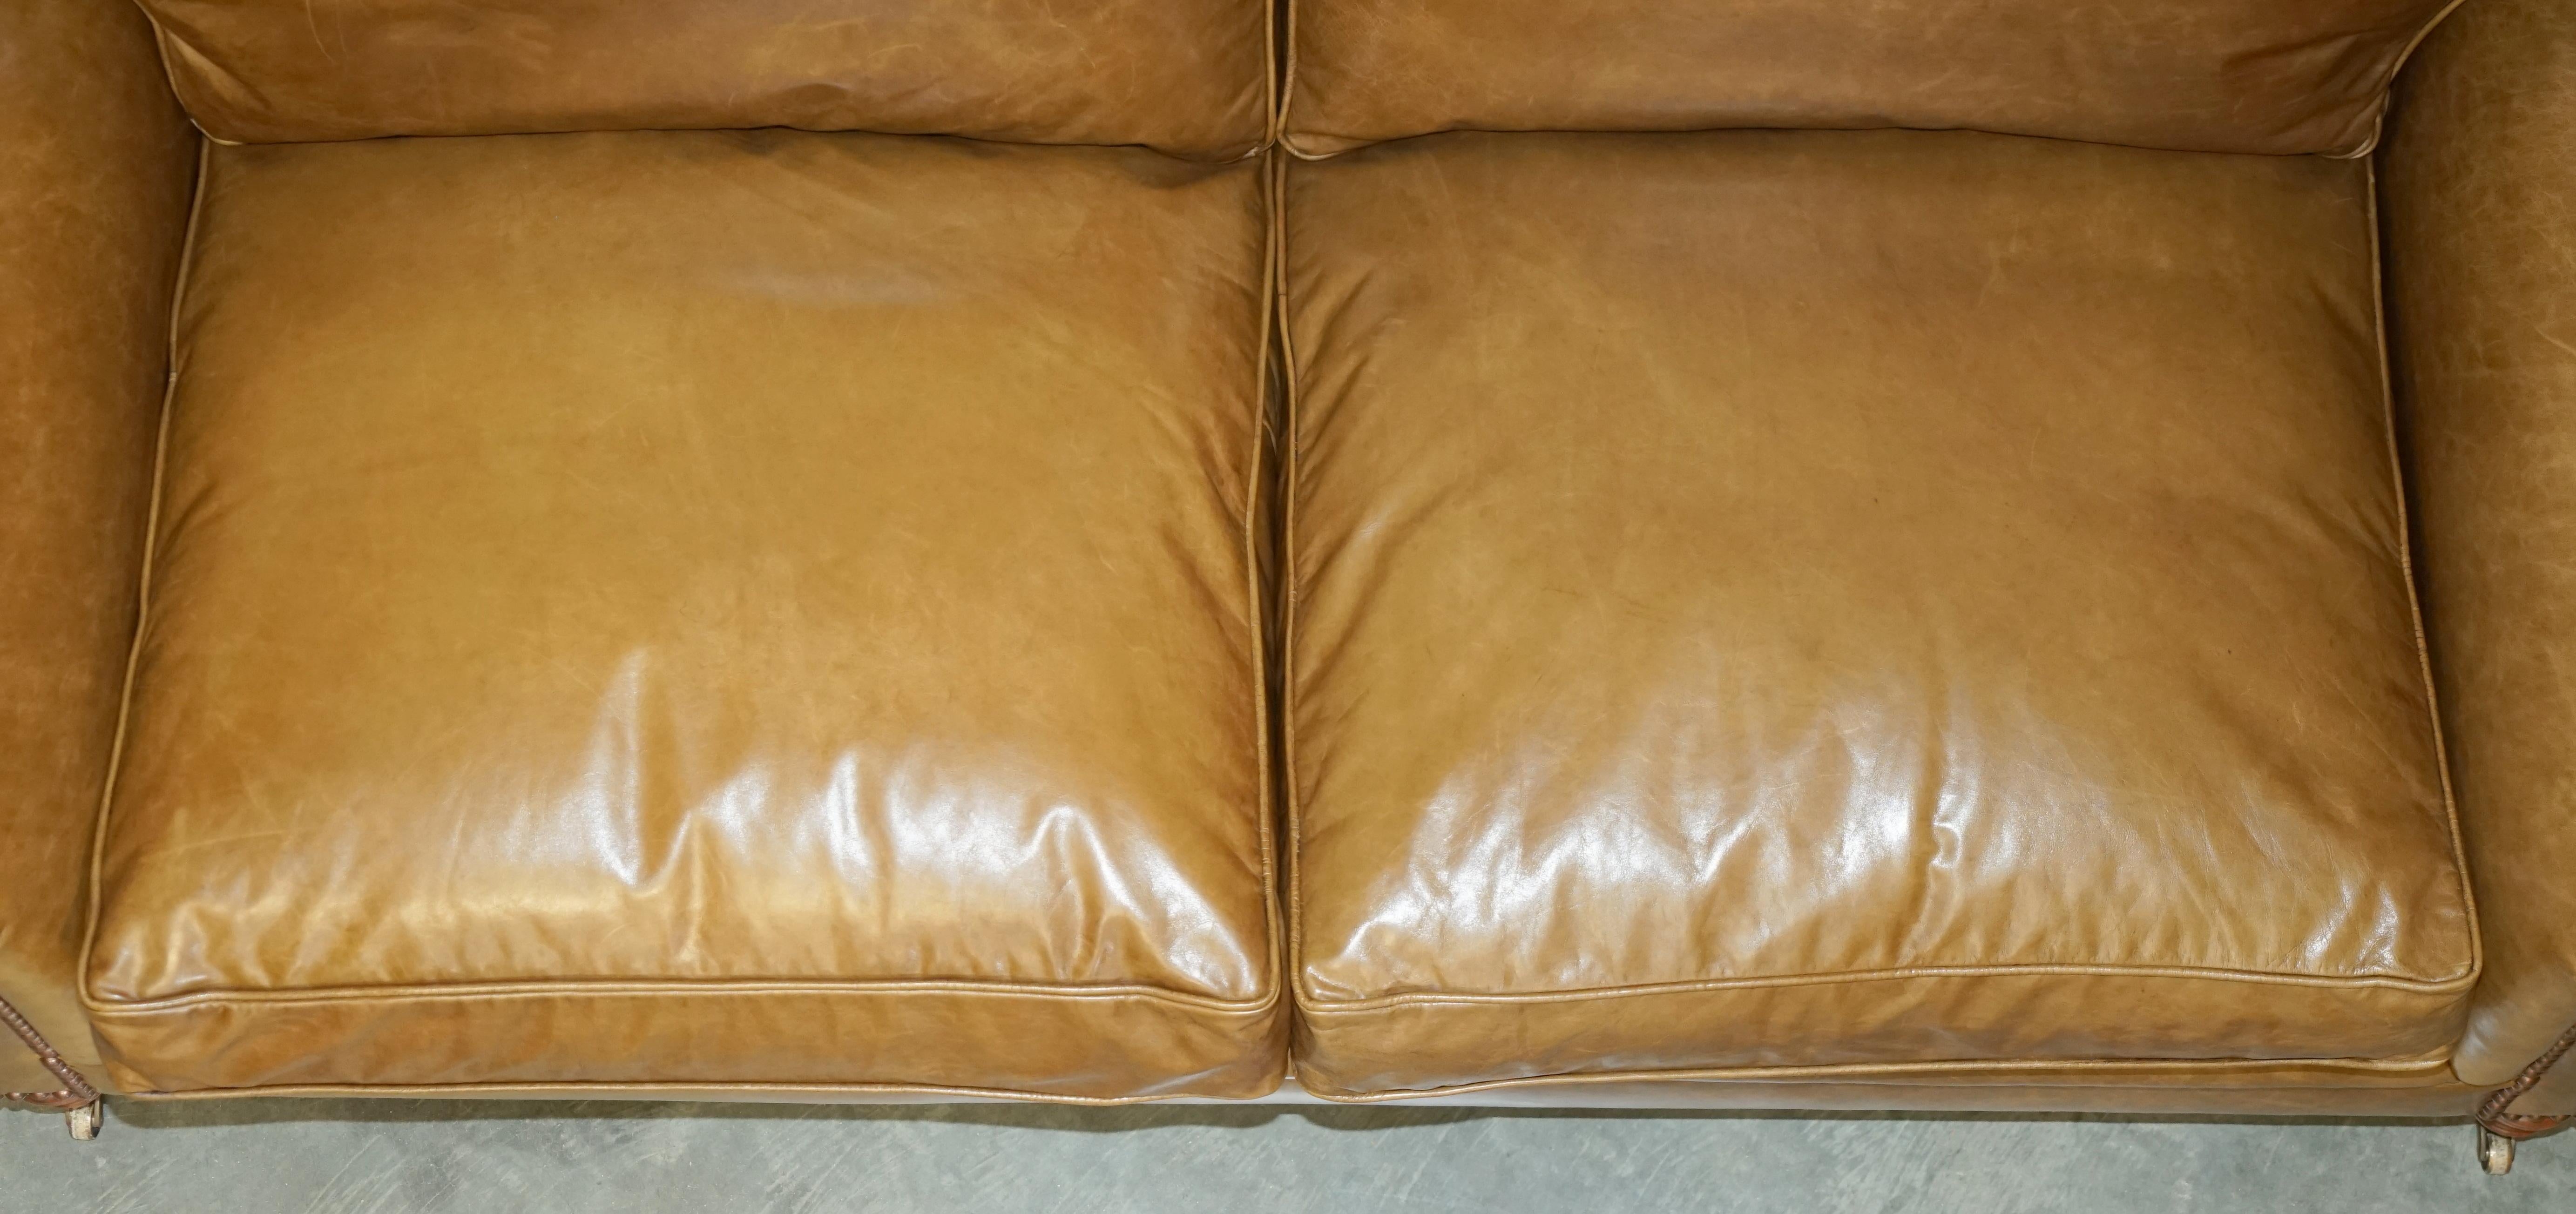 LOVELY GEORGE SMITH FULL SCROLL ARM CUSHiON BACK BROWN LEATHER SOFA For Sale 5